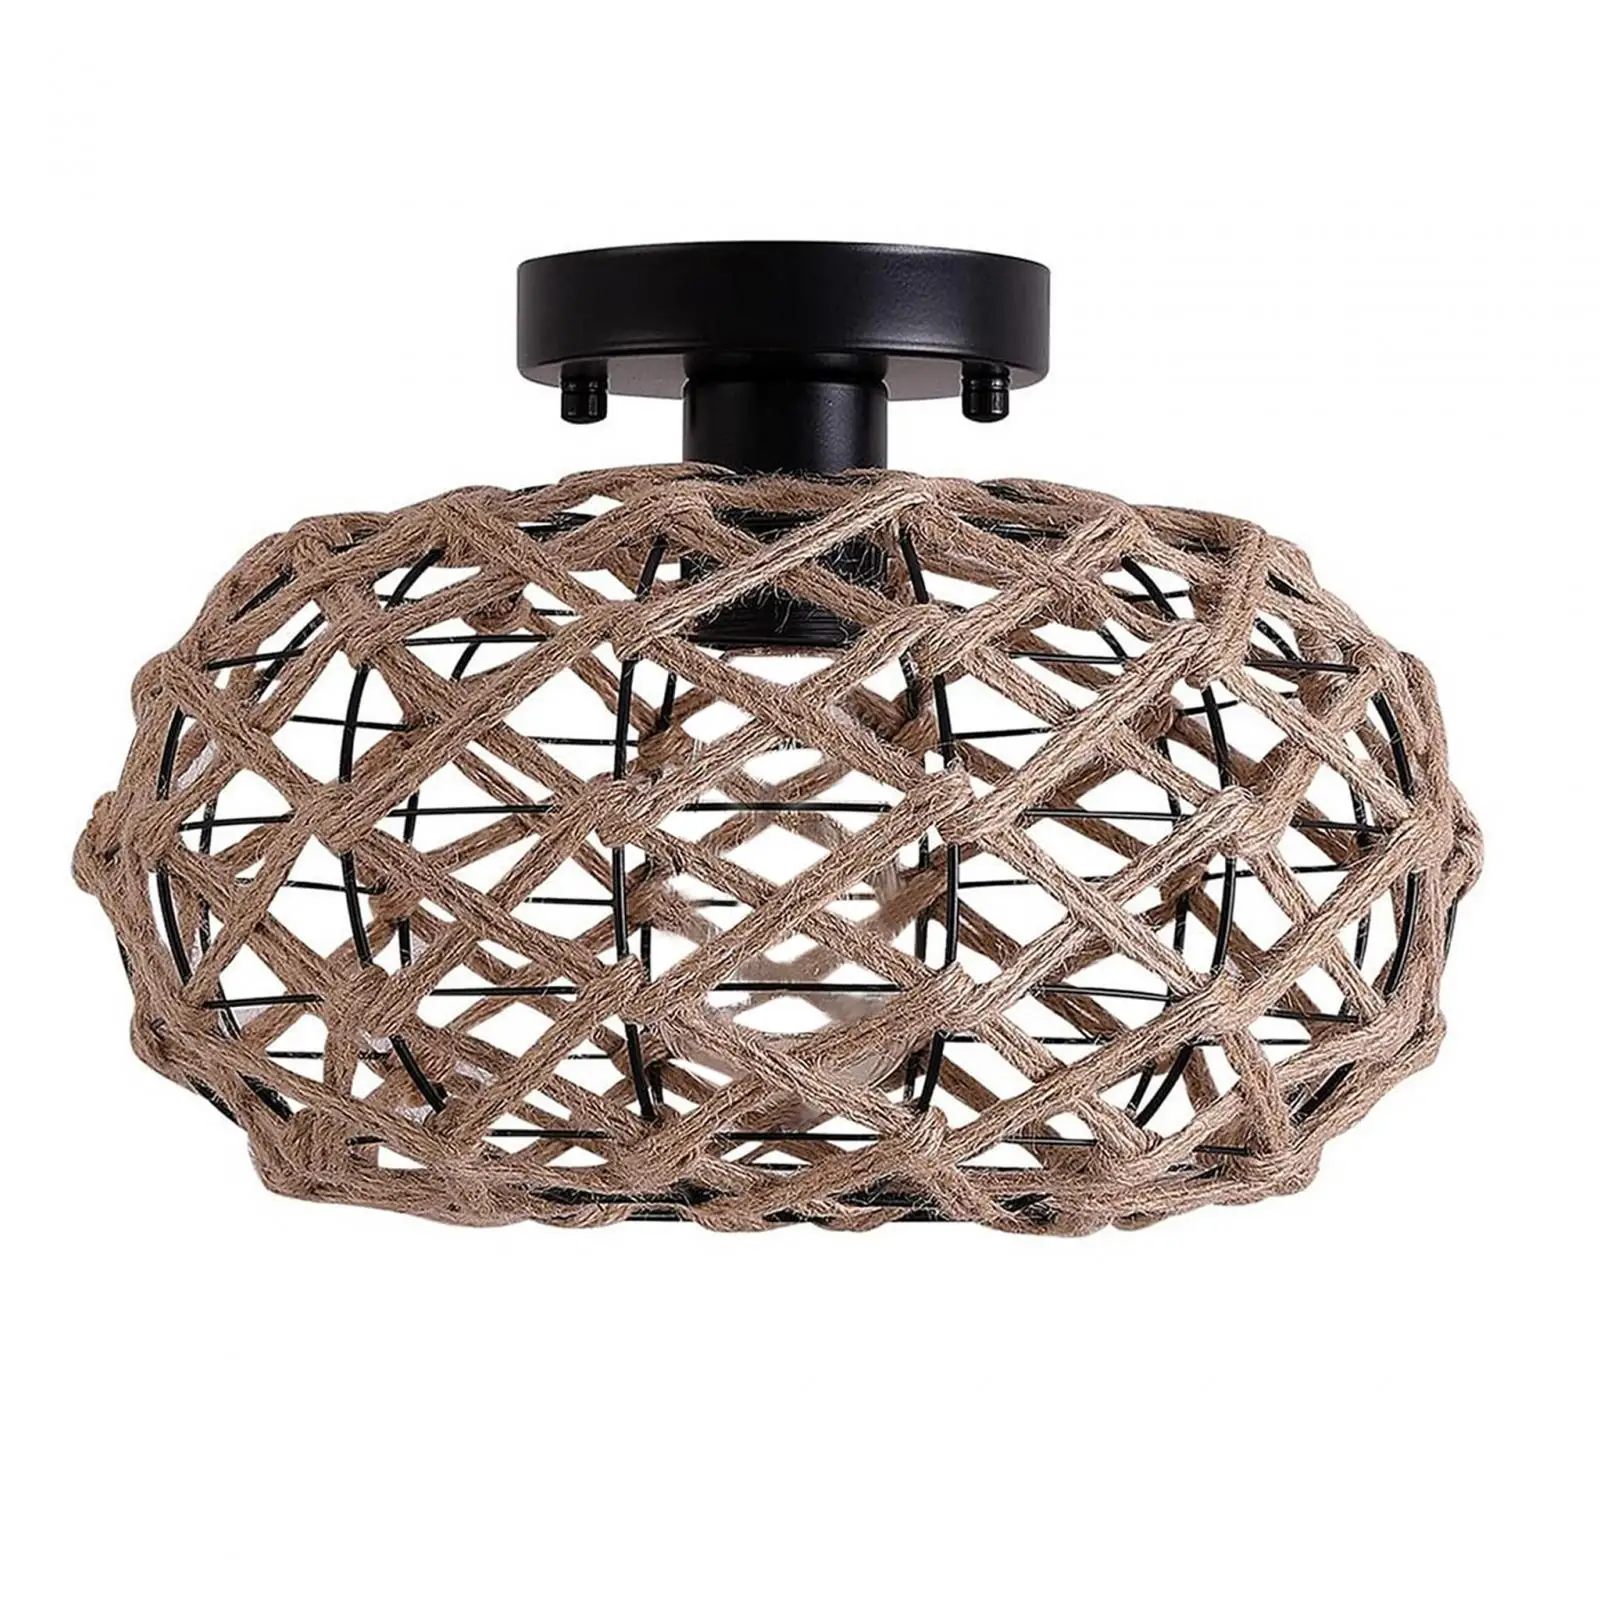 Woven Lampshade Bedside Lamp Ceiling Lamps Floor Lamps Hanging Pendant Lighting for Cafe Kitchen Outdoor Living Room Restaurant